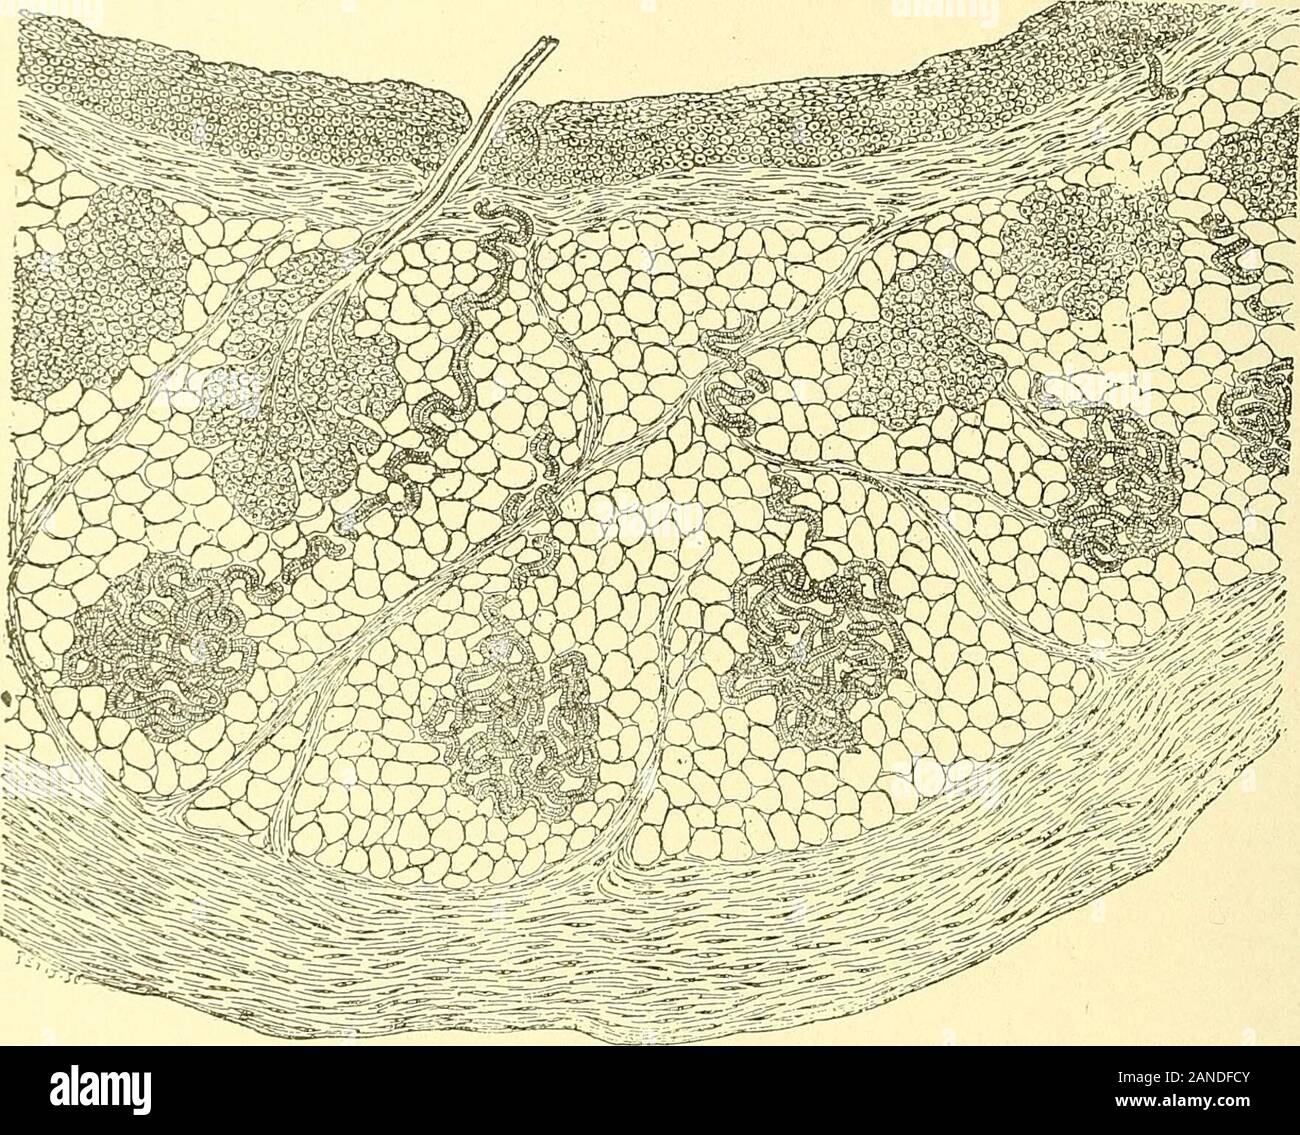 Treatise on gynaecology : medical and surgical . by Friedlander. Sudoriparous glands are also found.The hairs, whether free or imx3lanted, are long, tawny, agglutinatedtogether by sebaceous matter, and sometimes rolled into little balls.Sebum resembling the vernix caseosa partly fills the cavity, and oftenforms small, isolated masses; it is sometimes oily in consistency, andcontains many epithelial cells, cholesterin crystals, and fatty acids.Teeth and bones have been found in these cysts; the bones are in-serted in the wall, and more or less covered by the dermic layer; they VOL. II.- 98 CLIj Stock Photo